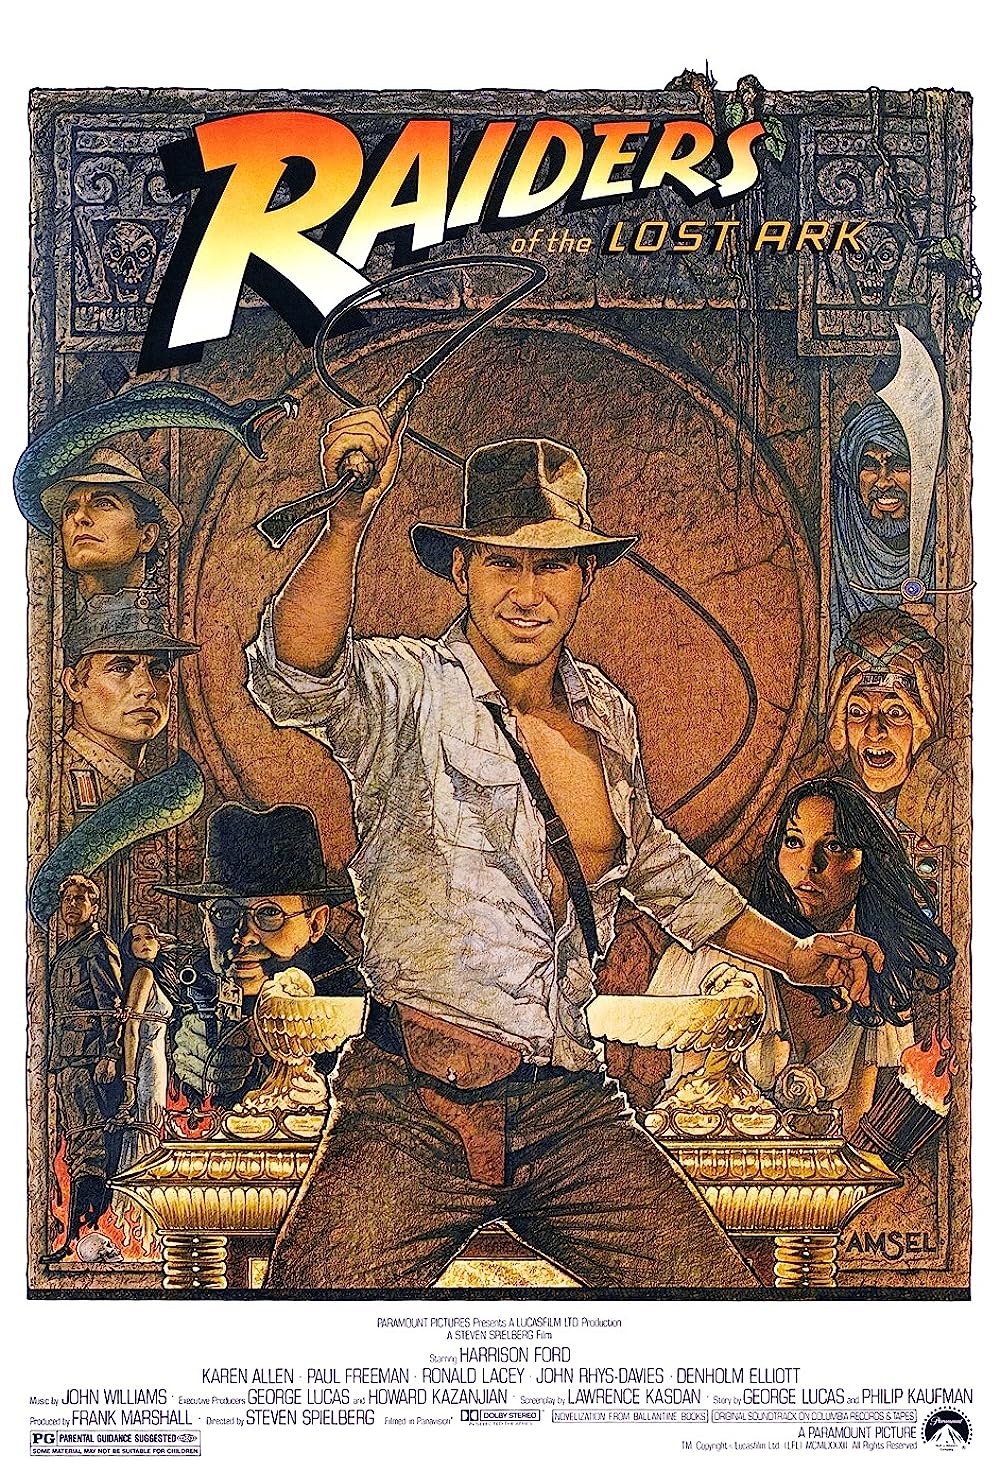 Indiana Jones And The Raiders Of The Lost Ark (1981)